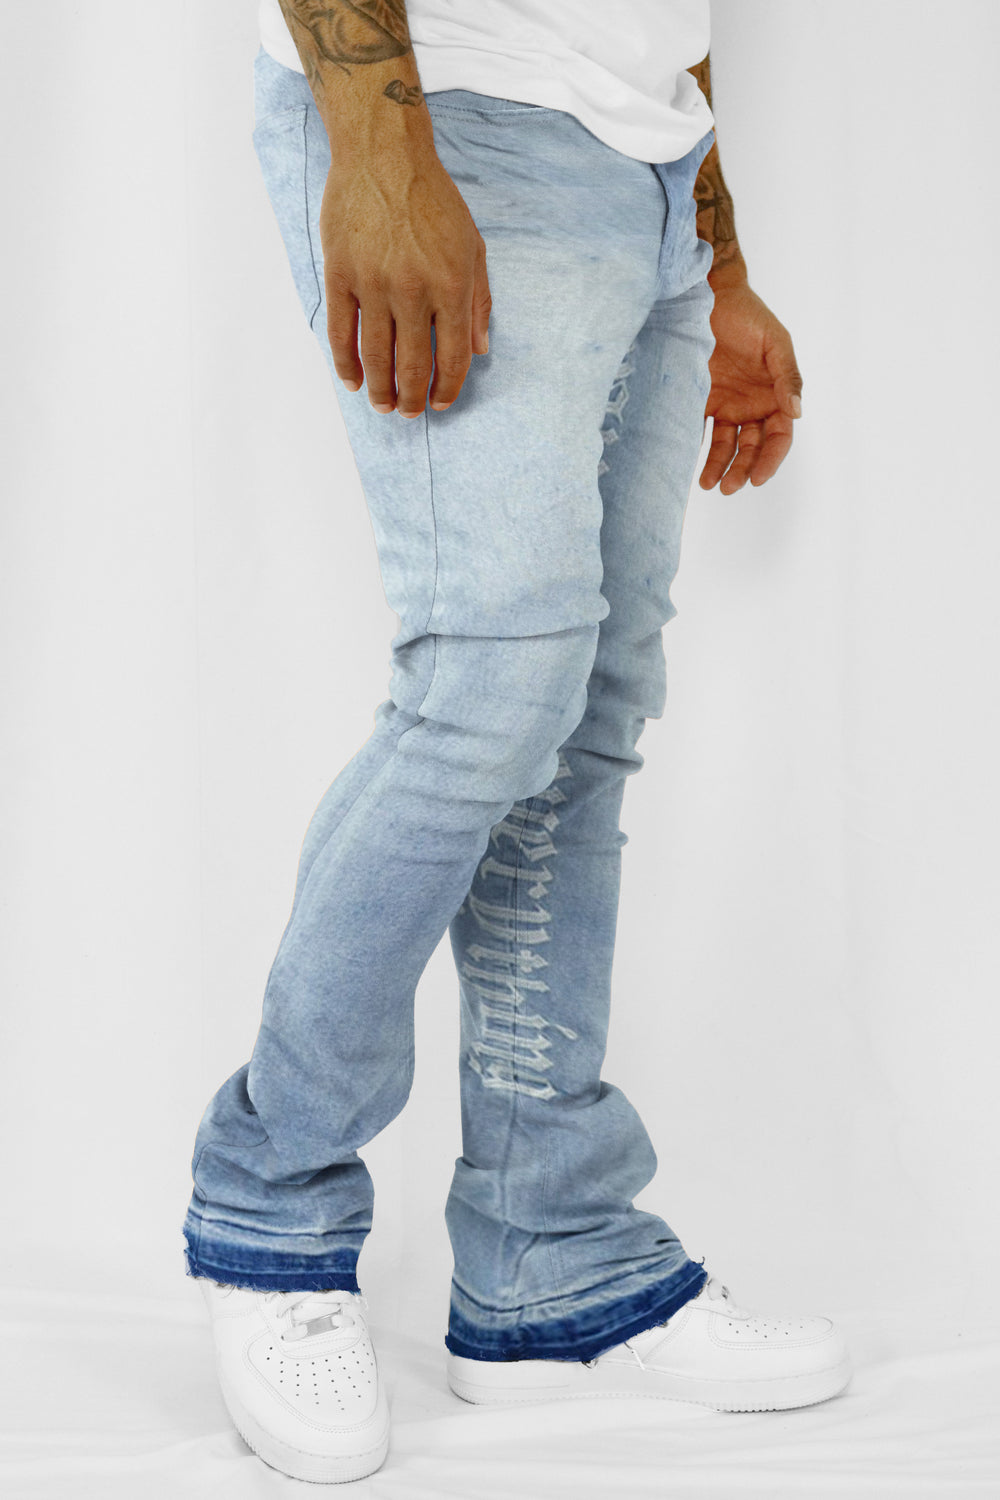 Loyalty Over Everything Stacked Denim (Bleach Wash) - Zamage